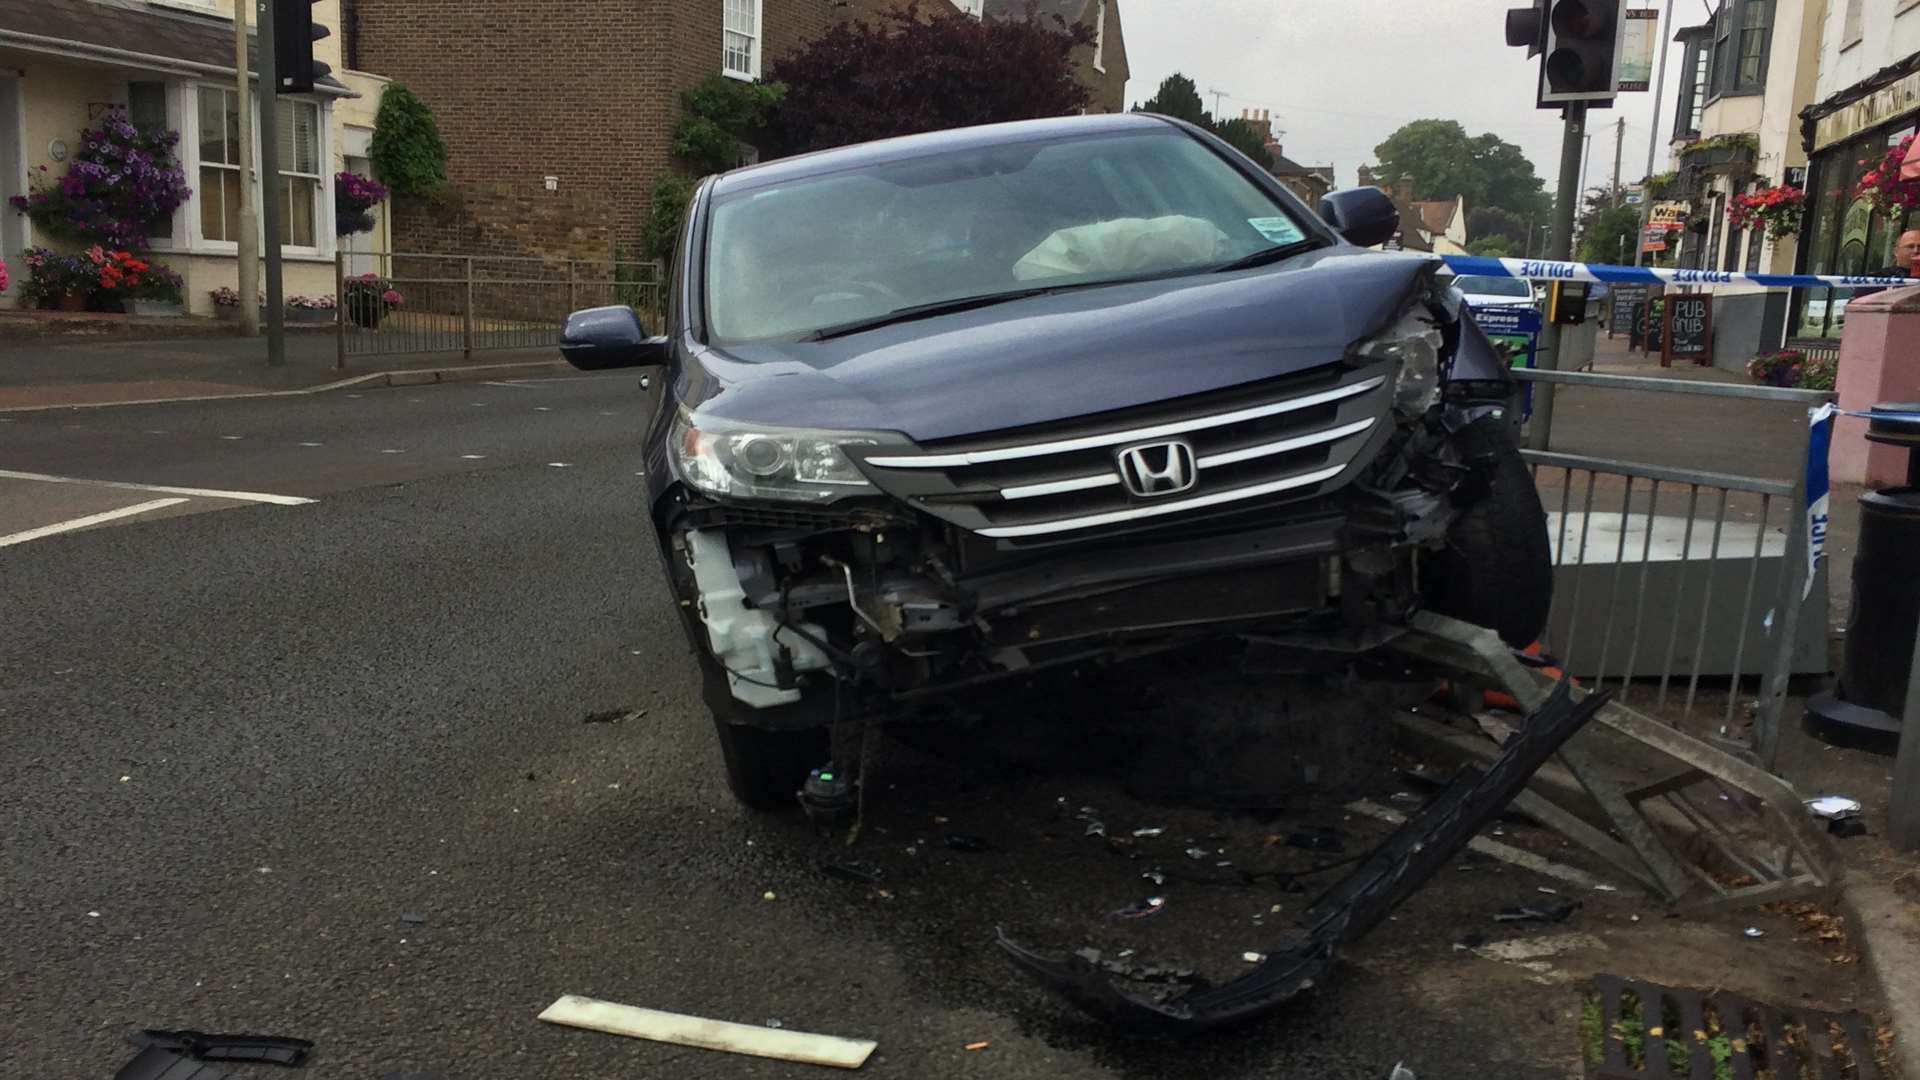 A car collided with barriers and traffic lights in Walmer this morning